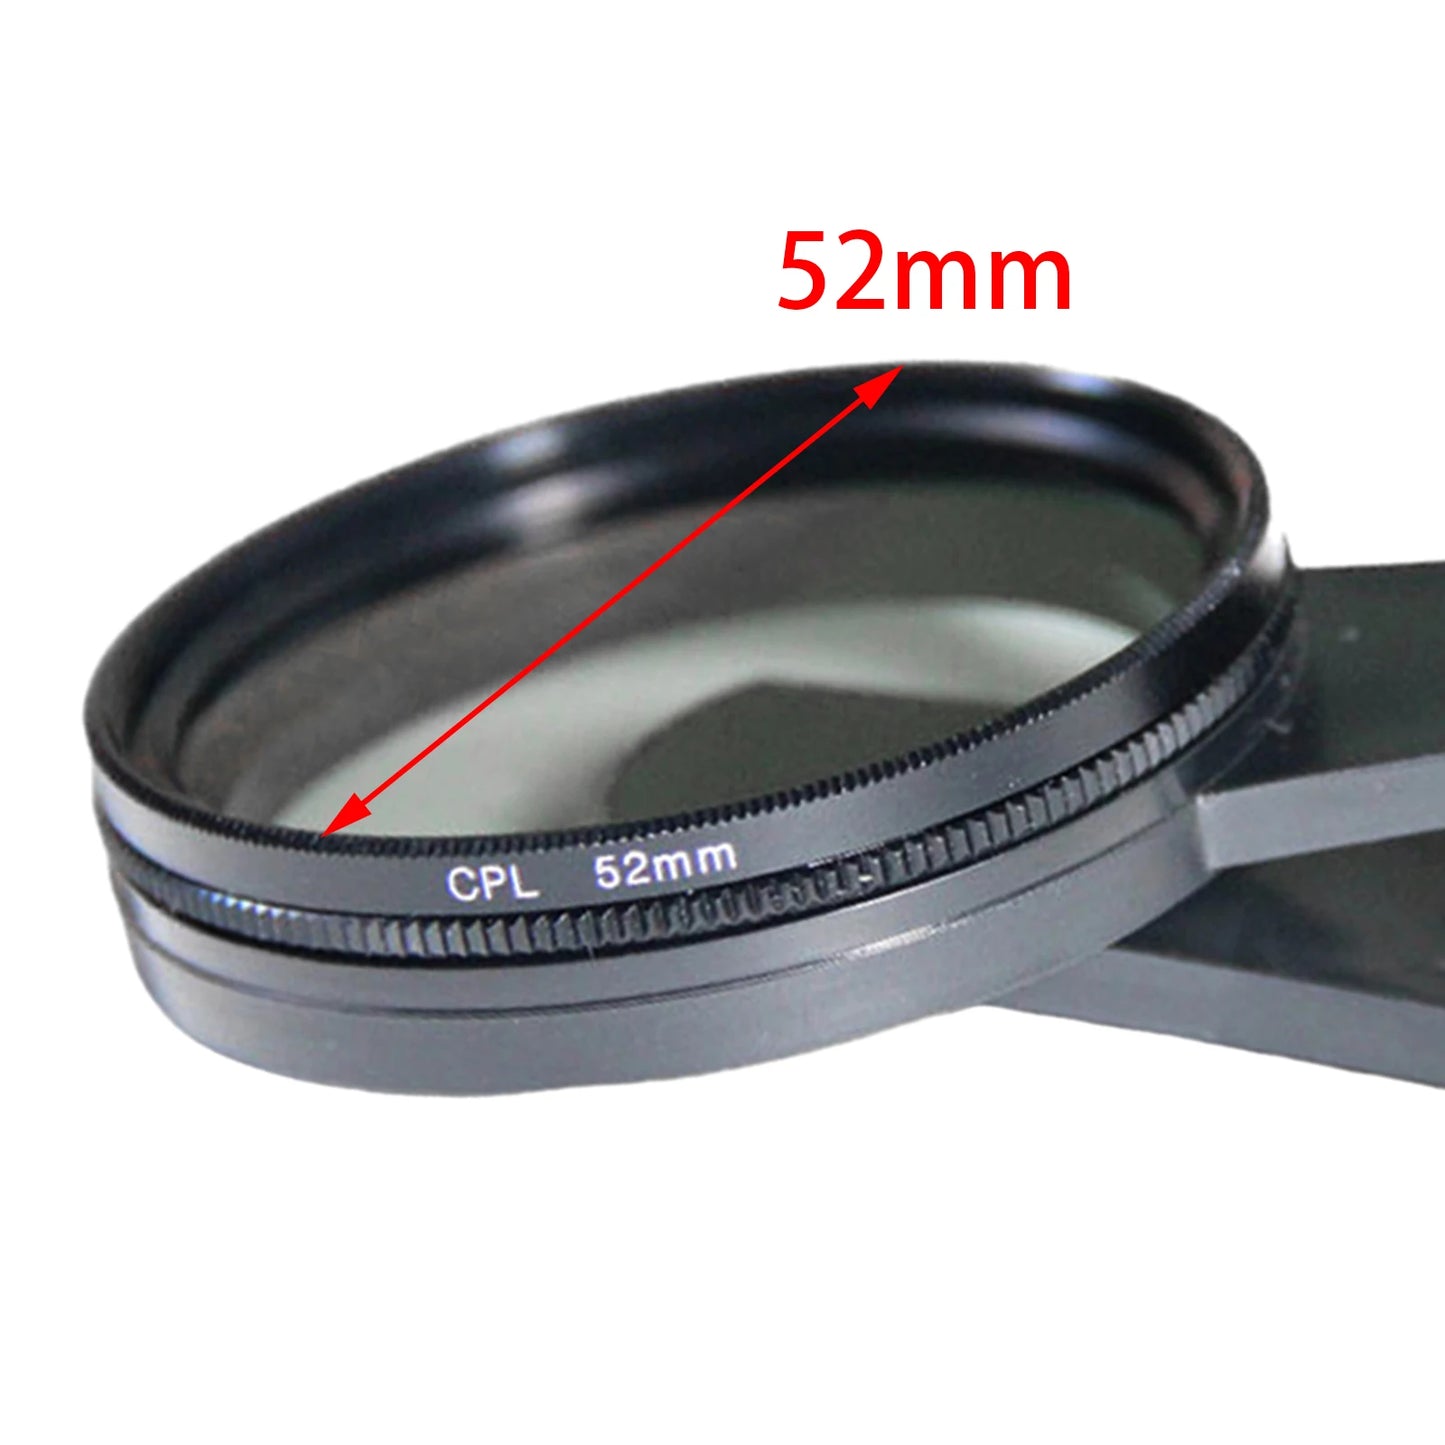 Polarized 52mm CPL Lens Enhancing Smartphone Photography